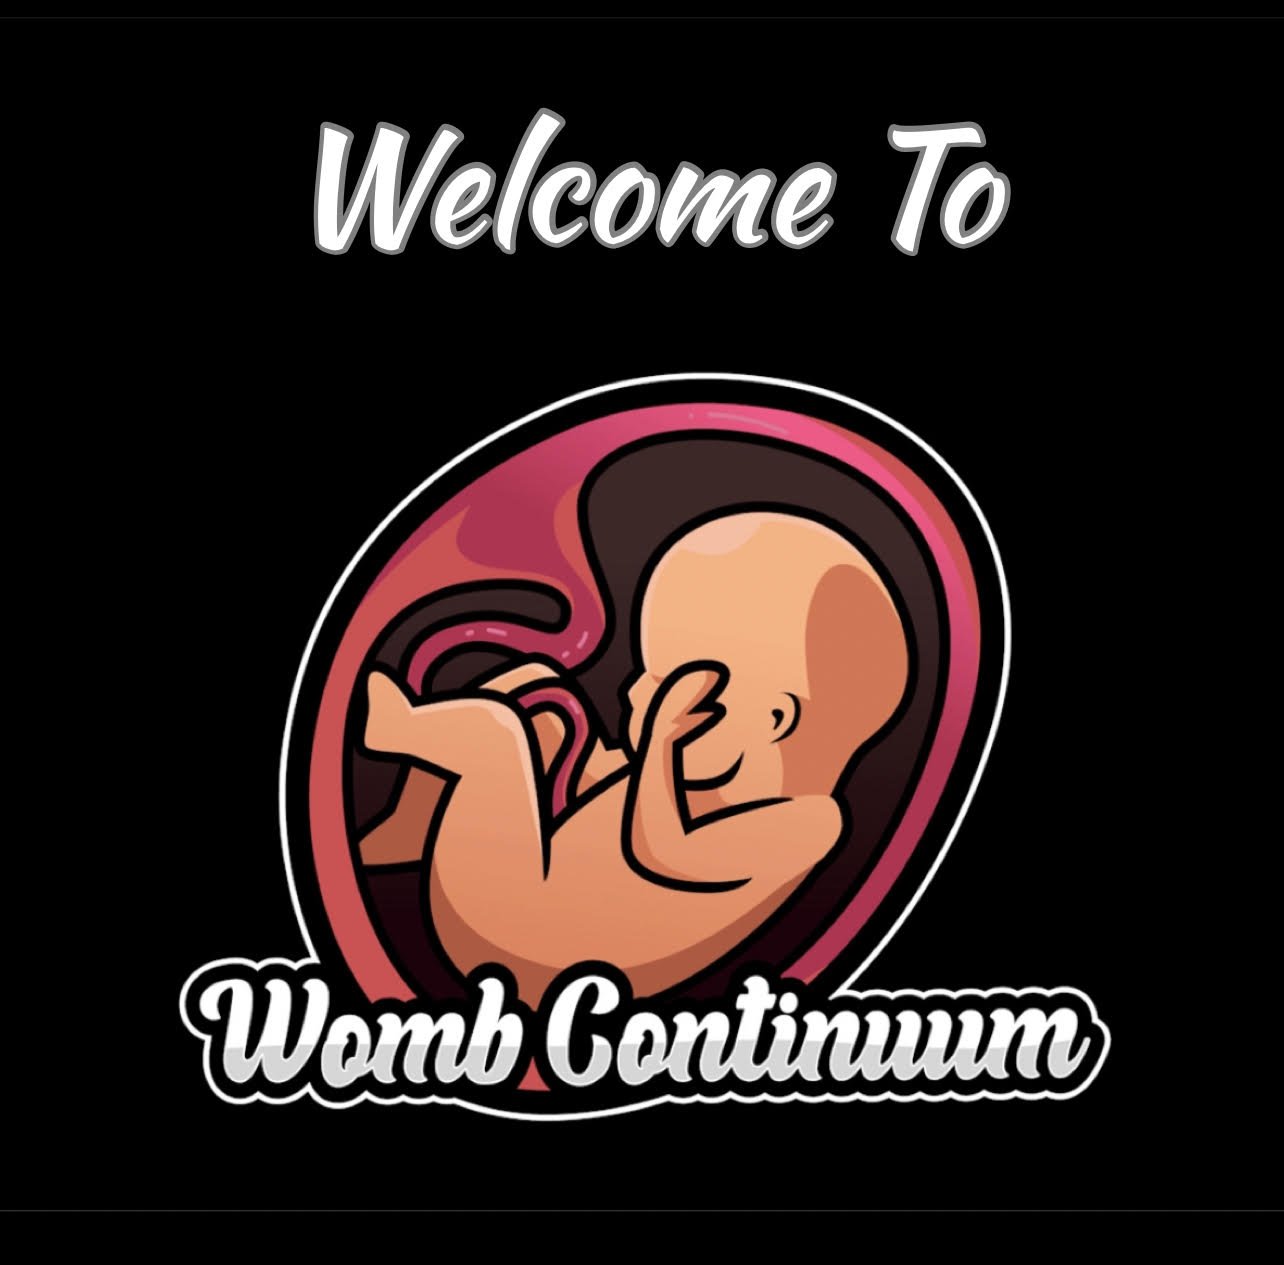 Womb Continuum by Frank Carbone